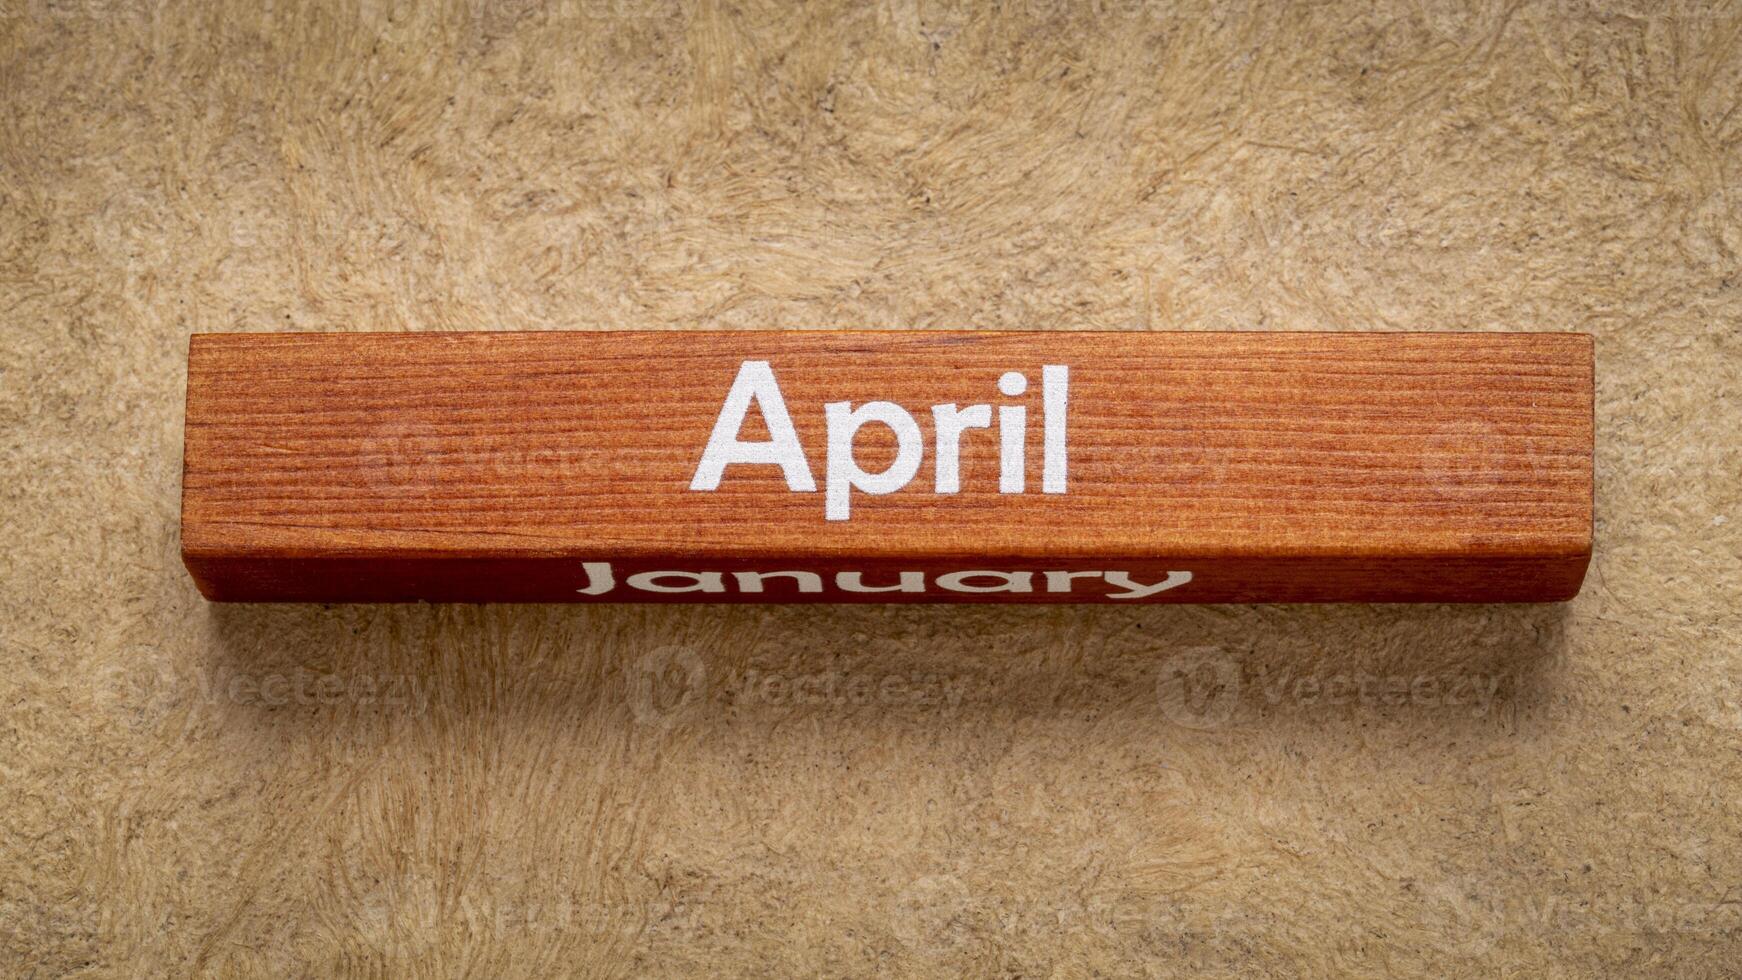 April and January text on wooden block against handmade bark paper in earth tones, calendar concept photo